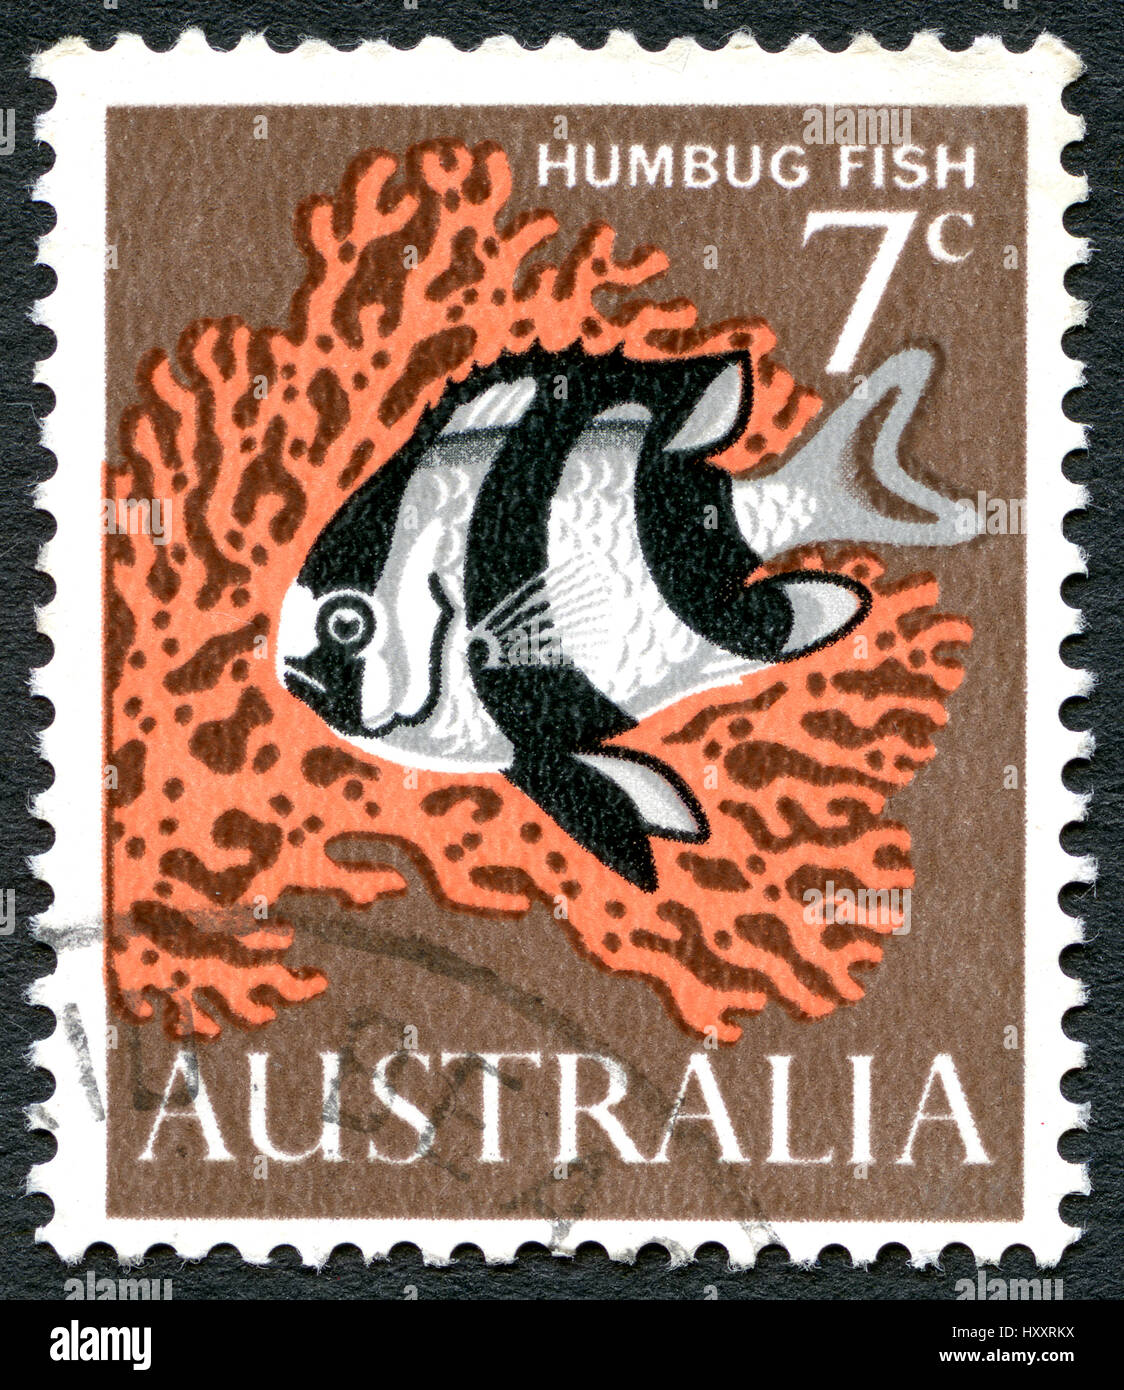 AUSTRALIA - CIRCA 1966: A used postage stamp from Australia, depicting an illustration of a Humbug Fish, circa 1966. Stock Photo